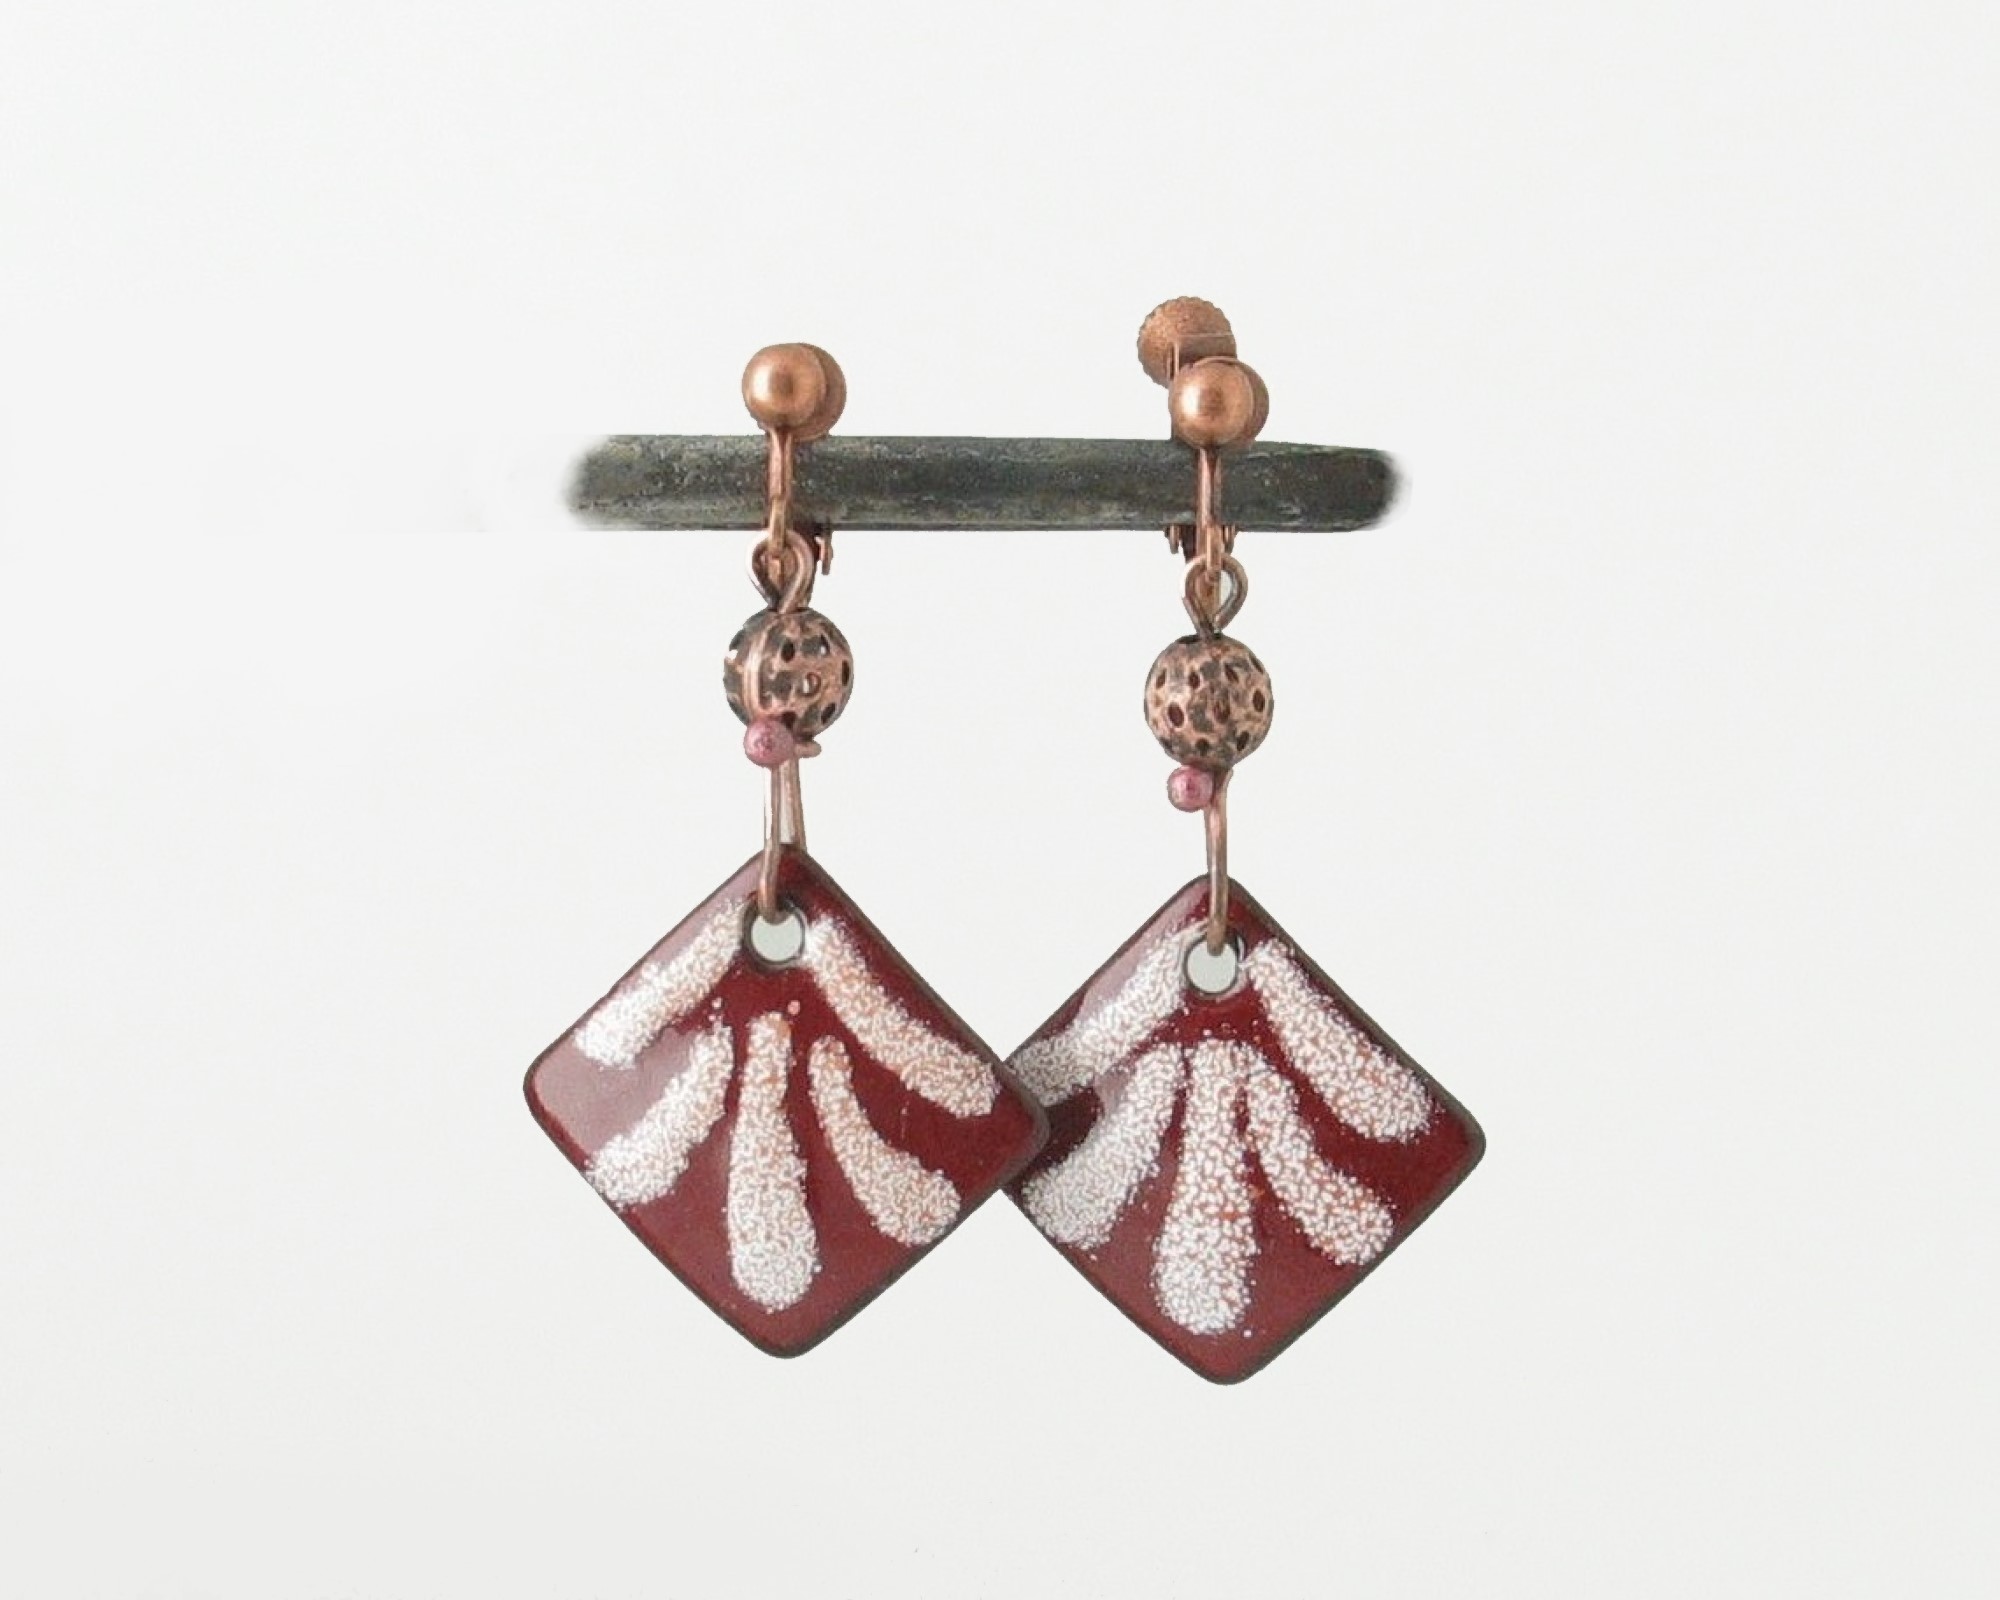 Clip-on Non-Pierced Enameled Copper Earrings with Stenciled Blush Design over Burgundy Torch-Fired Enamel, Antiqued Copper Ear Clips